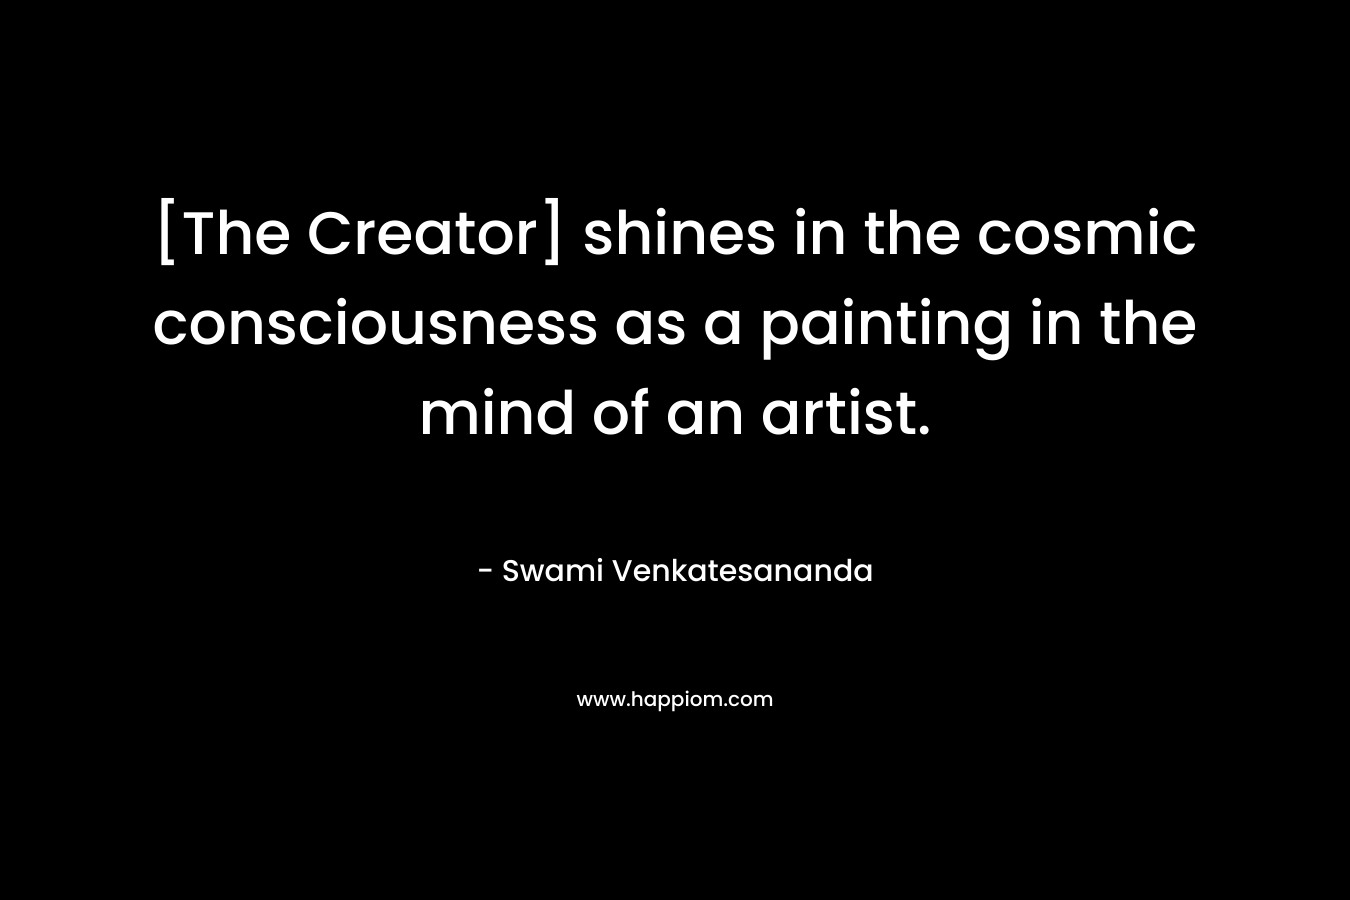 [The Creator] shines in the cosmic consciousness as a painting in the mind of an artist.